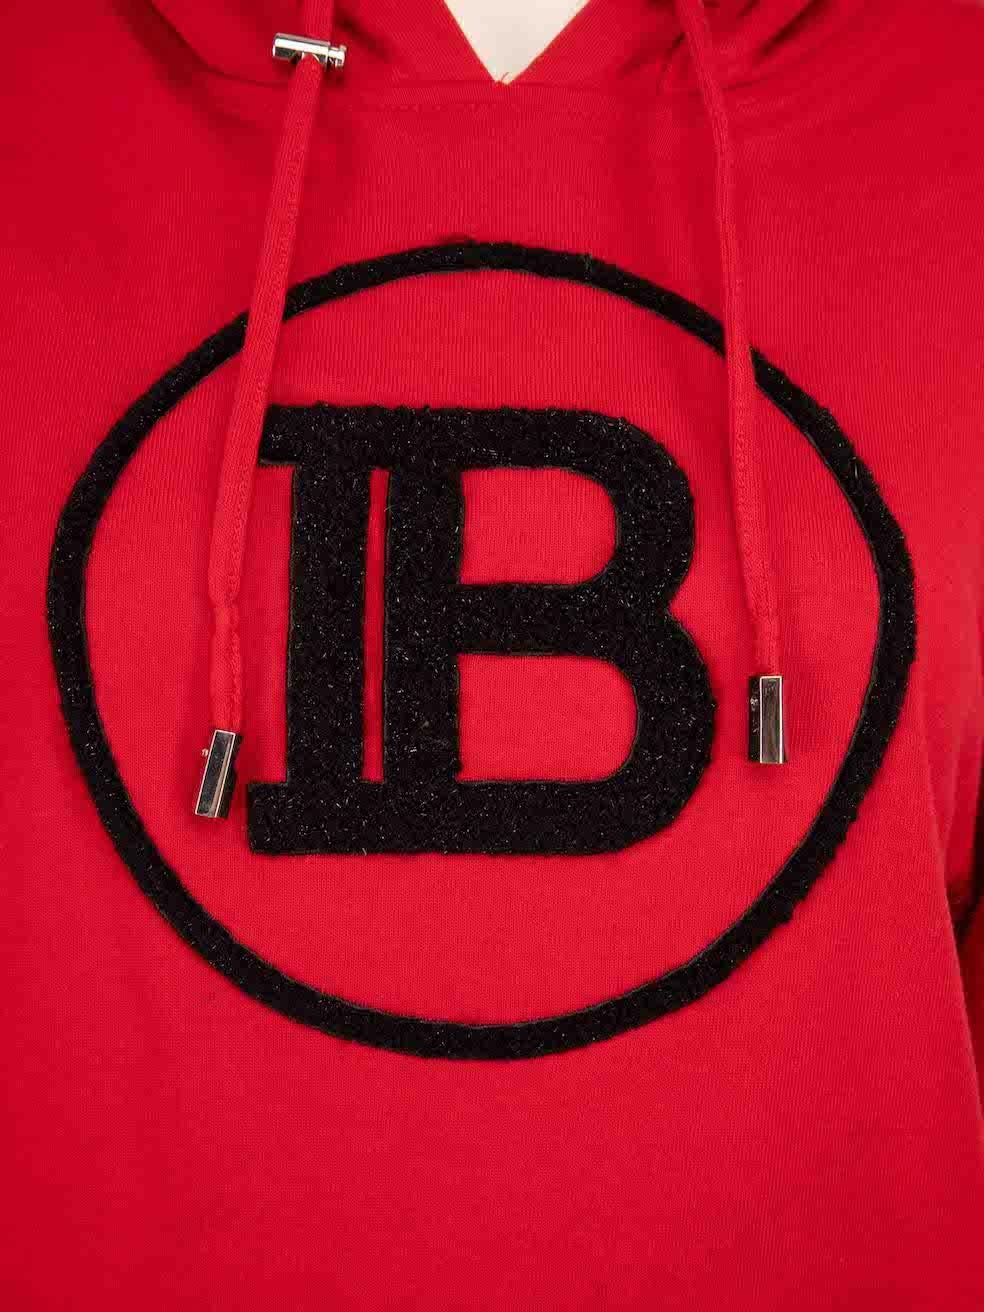 Women's Balmain Red Logo Embroidered Zip Detail Hoodie Size L For Sale